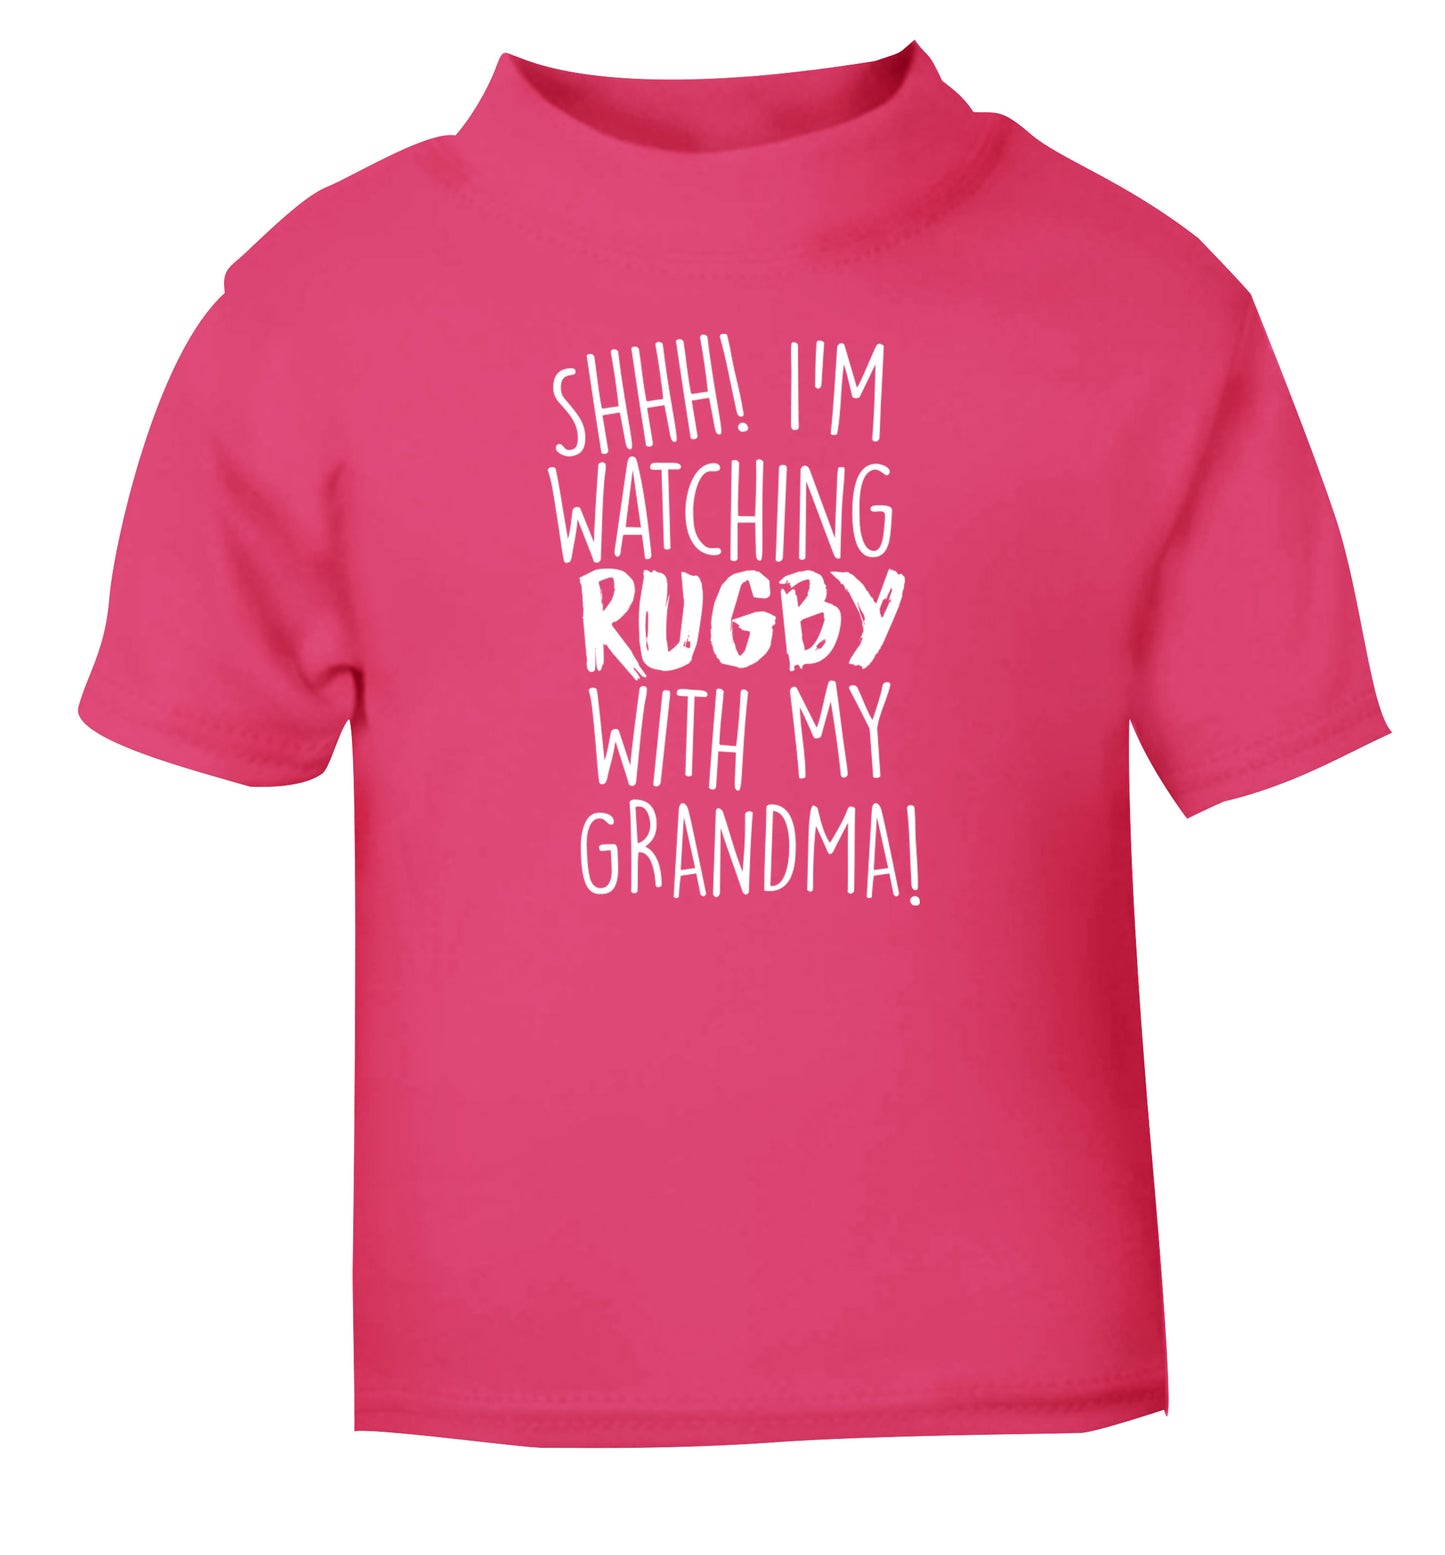 Shh I'm watching rugby with my grandma pink Baby Toddler Tshirt 2 Years